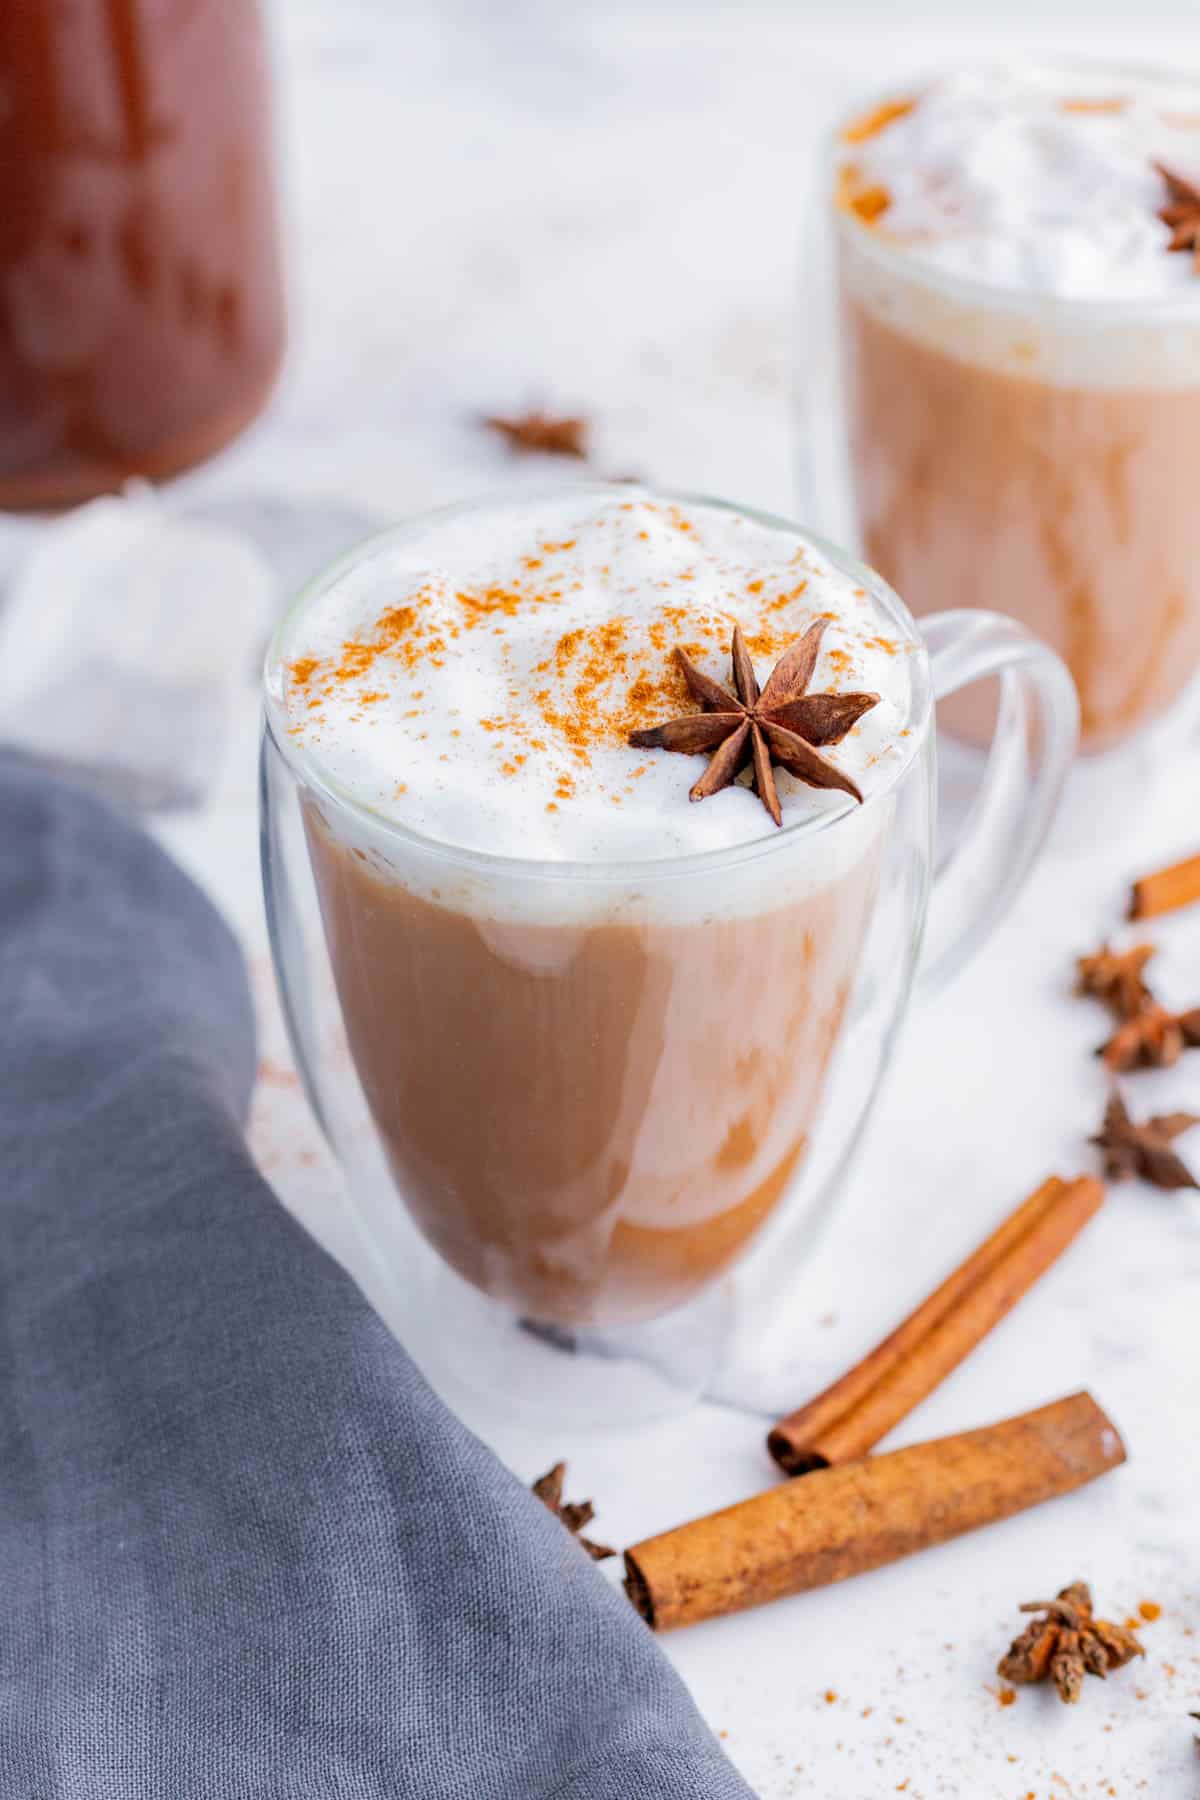 Warm spices, like cinnamon and star anise, top glasses of hot Chai tea.